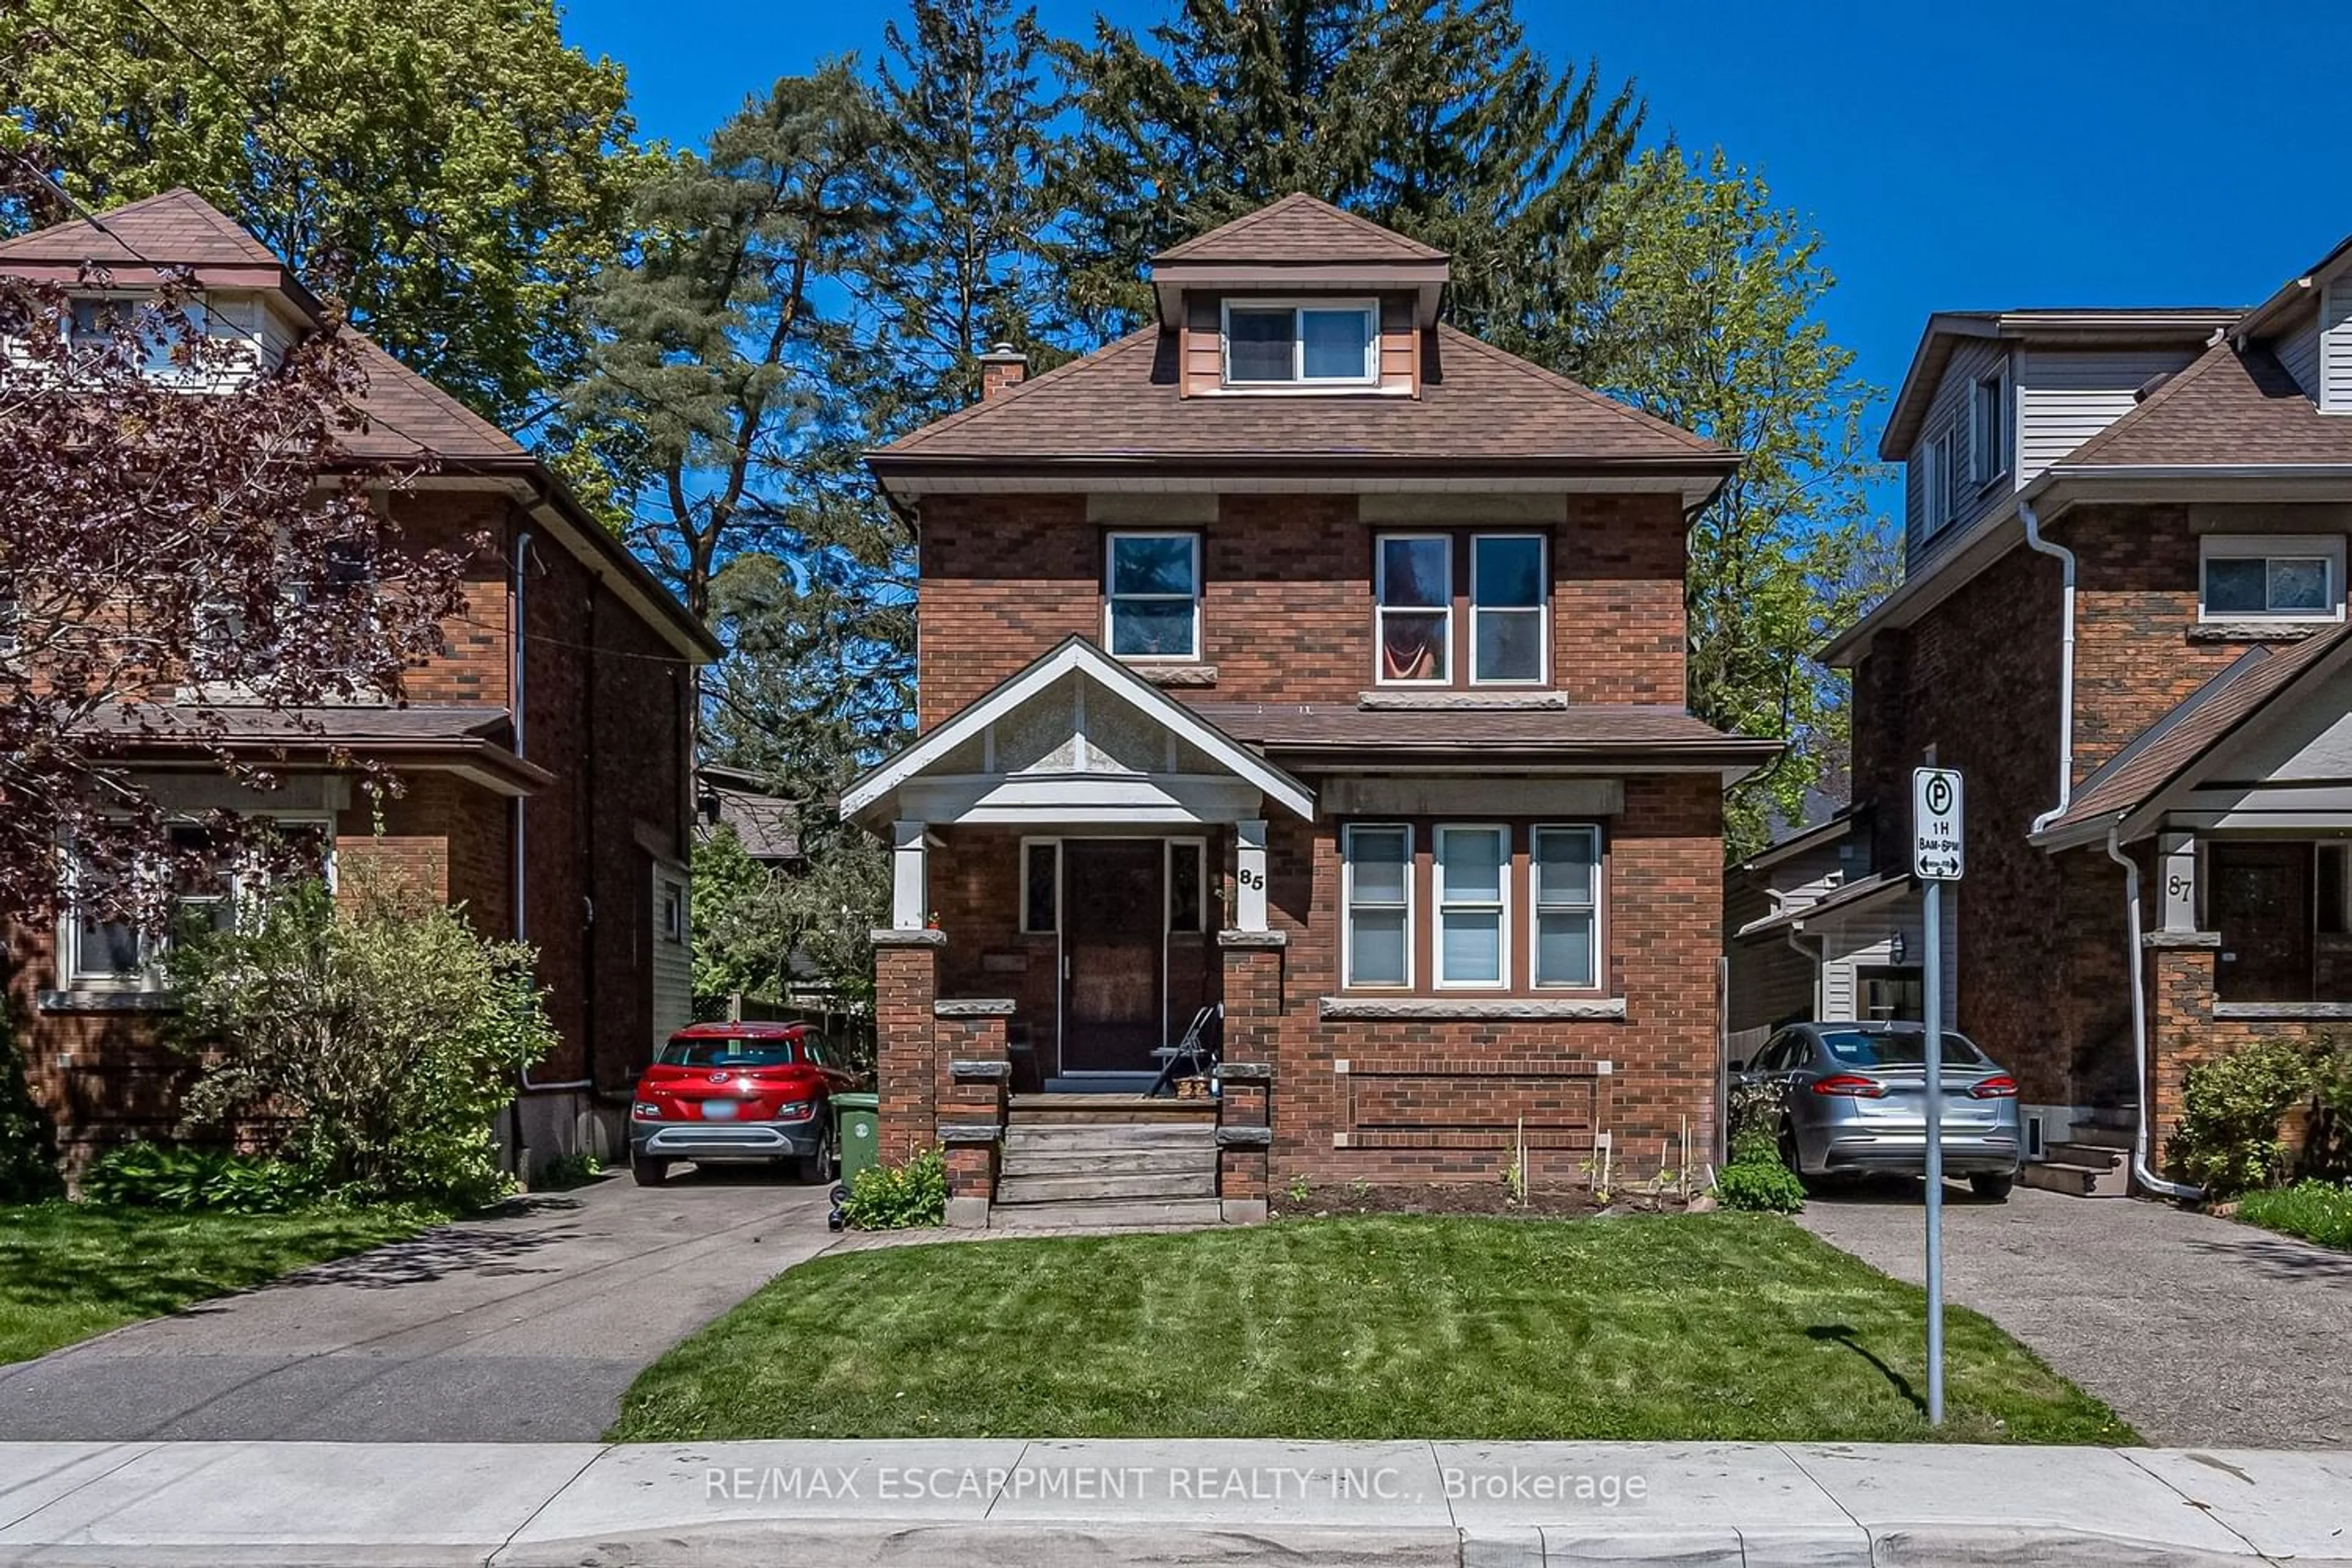 Home with brick exterior material for 85 Haddon Ave, Hamilton Ontario L8S 4A4